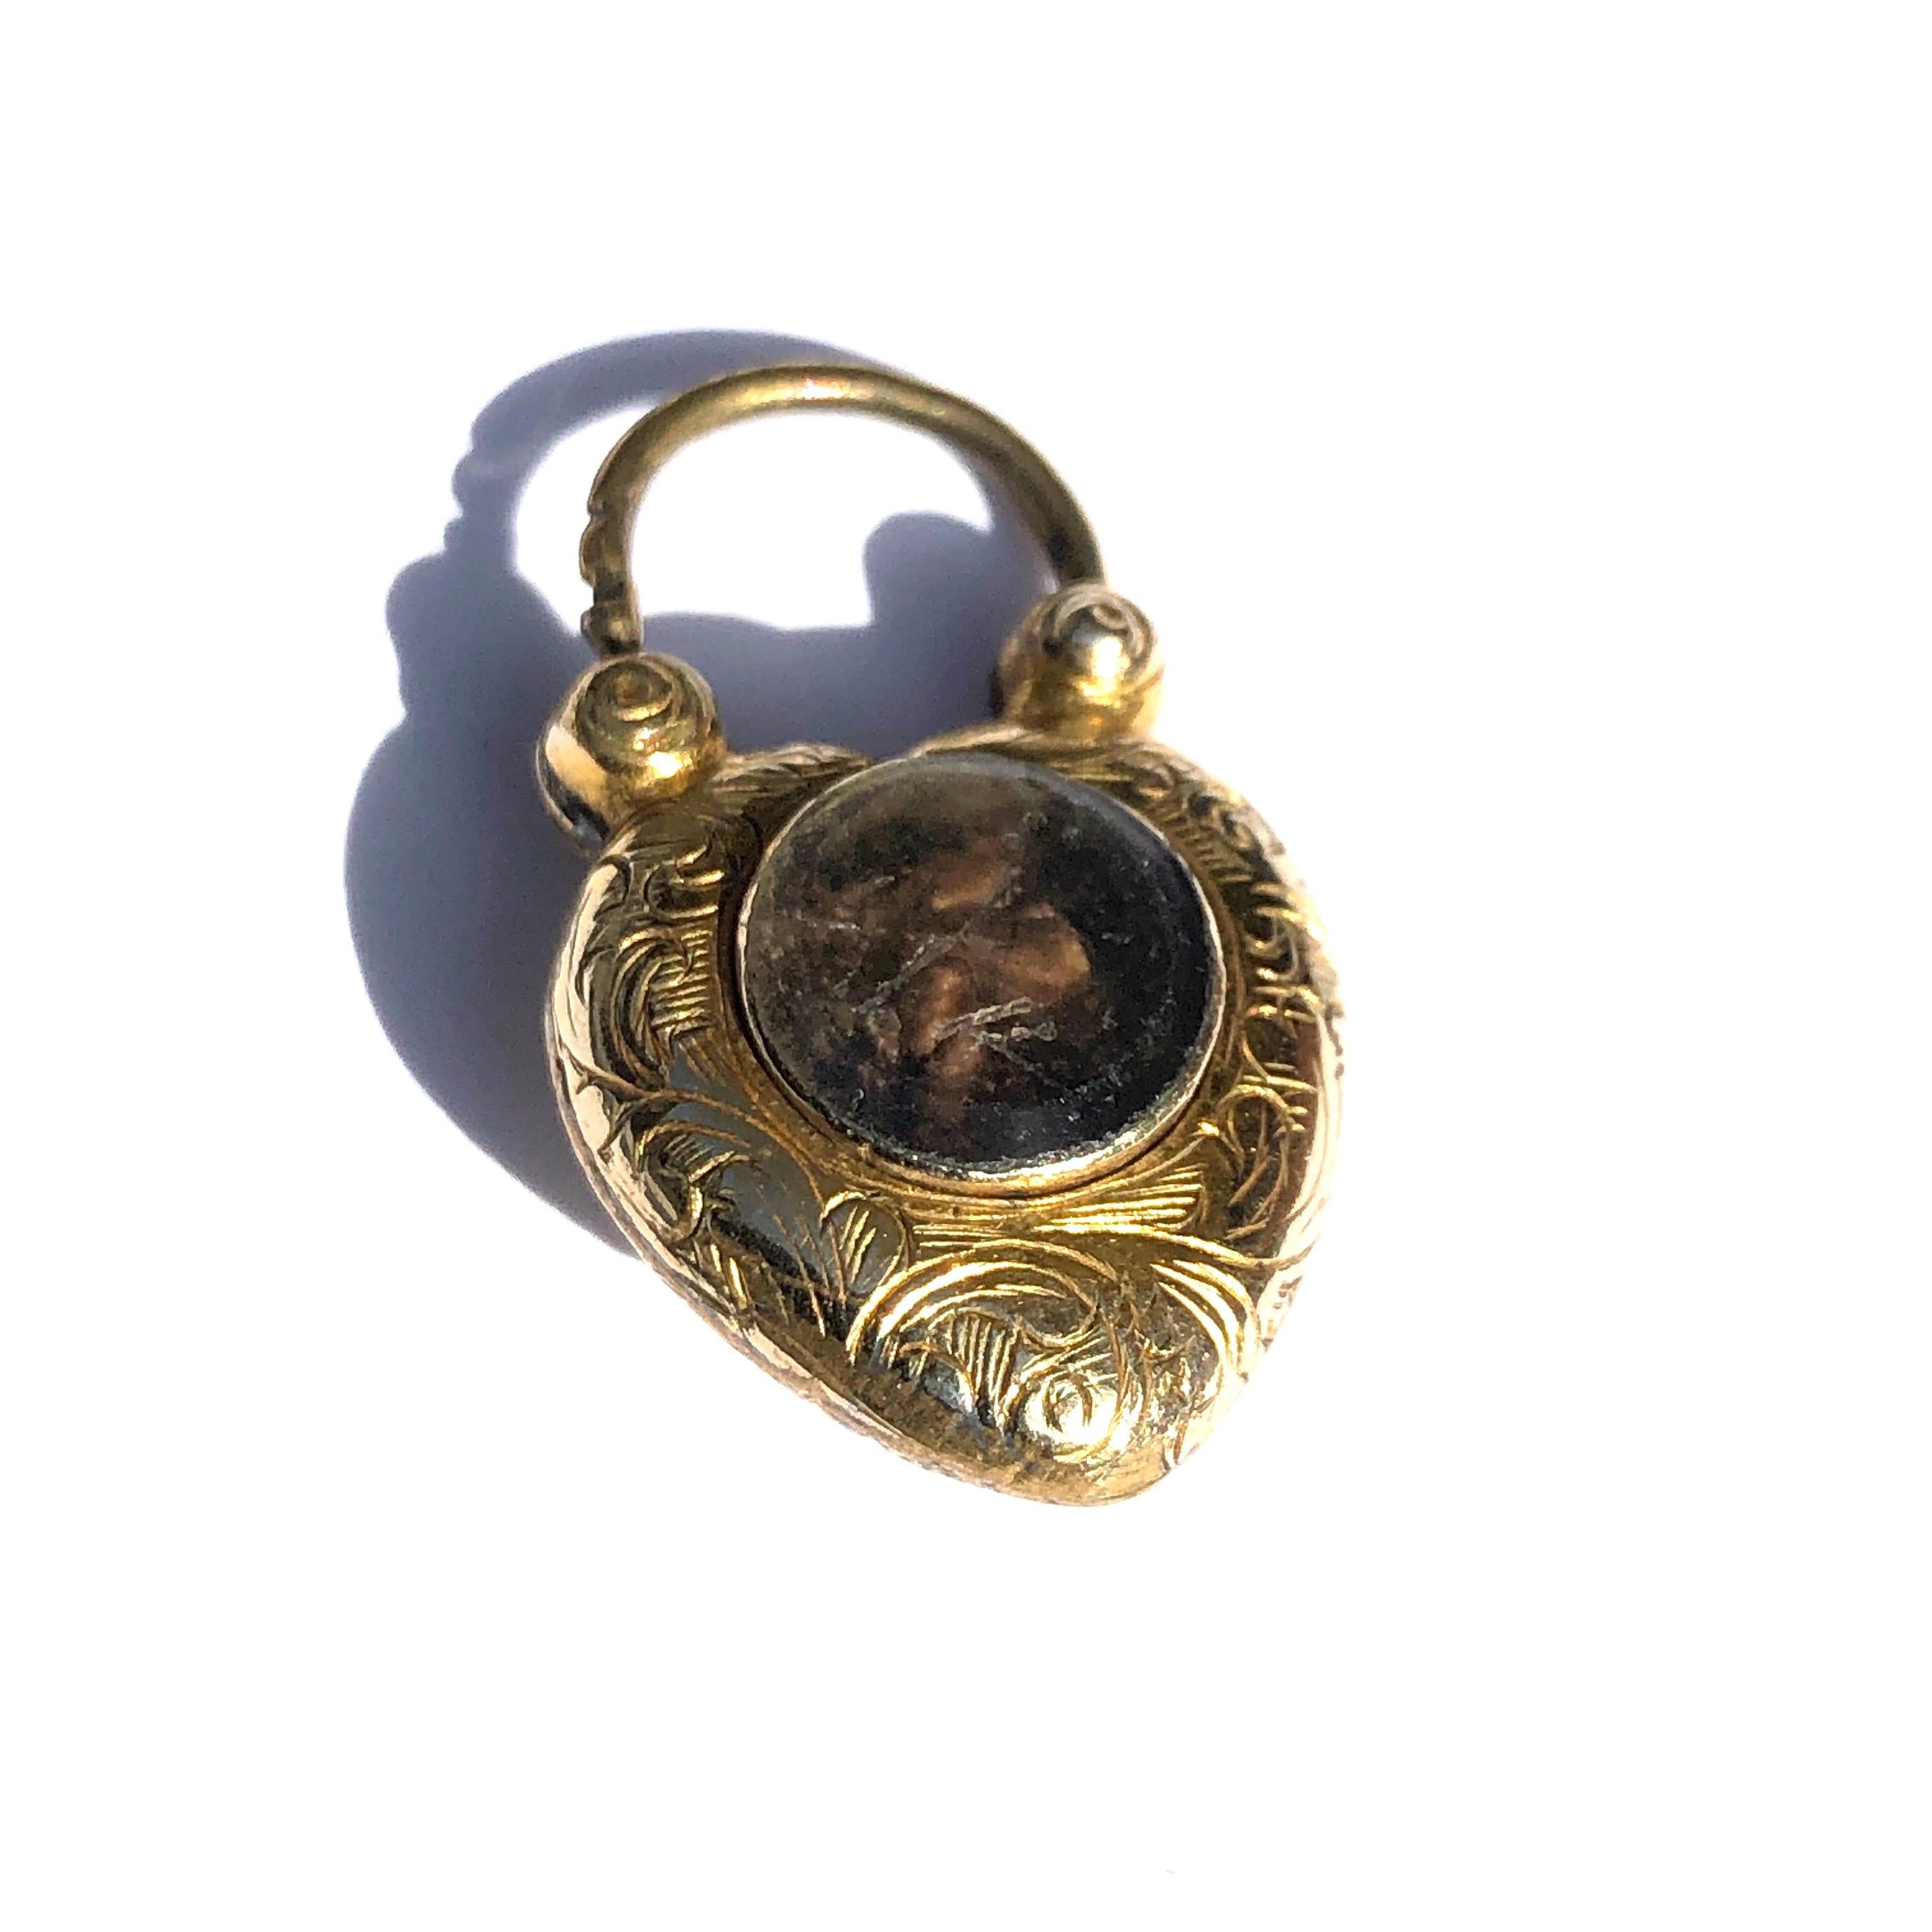 The heart shaped padlock features exquisite scroll leaf engraving and a cluster in the shape of a flower with turquoise petals and a ruby centre. On the other side of this pendant is a glazed locket holding a lock of hair. 

Height: 1inch 

Weight: